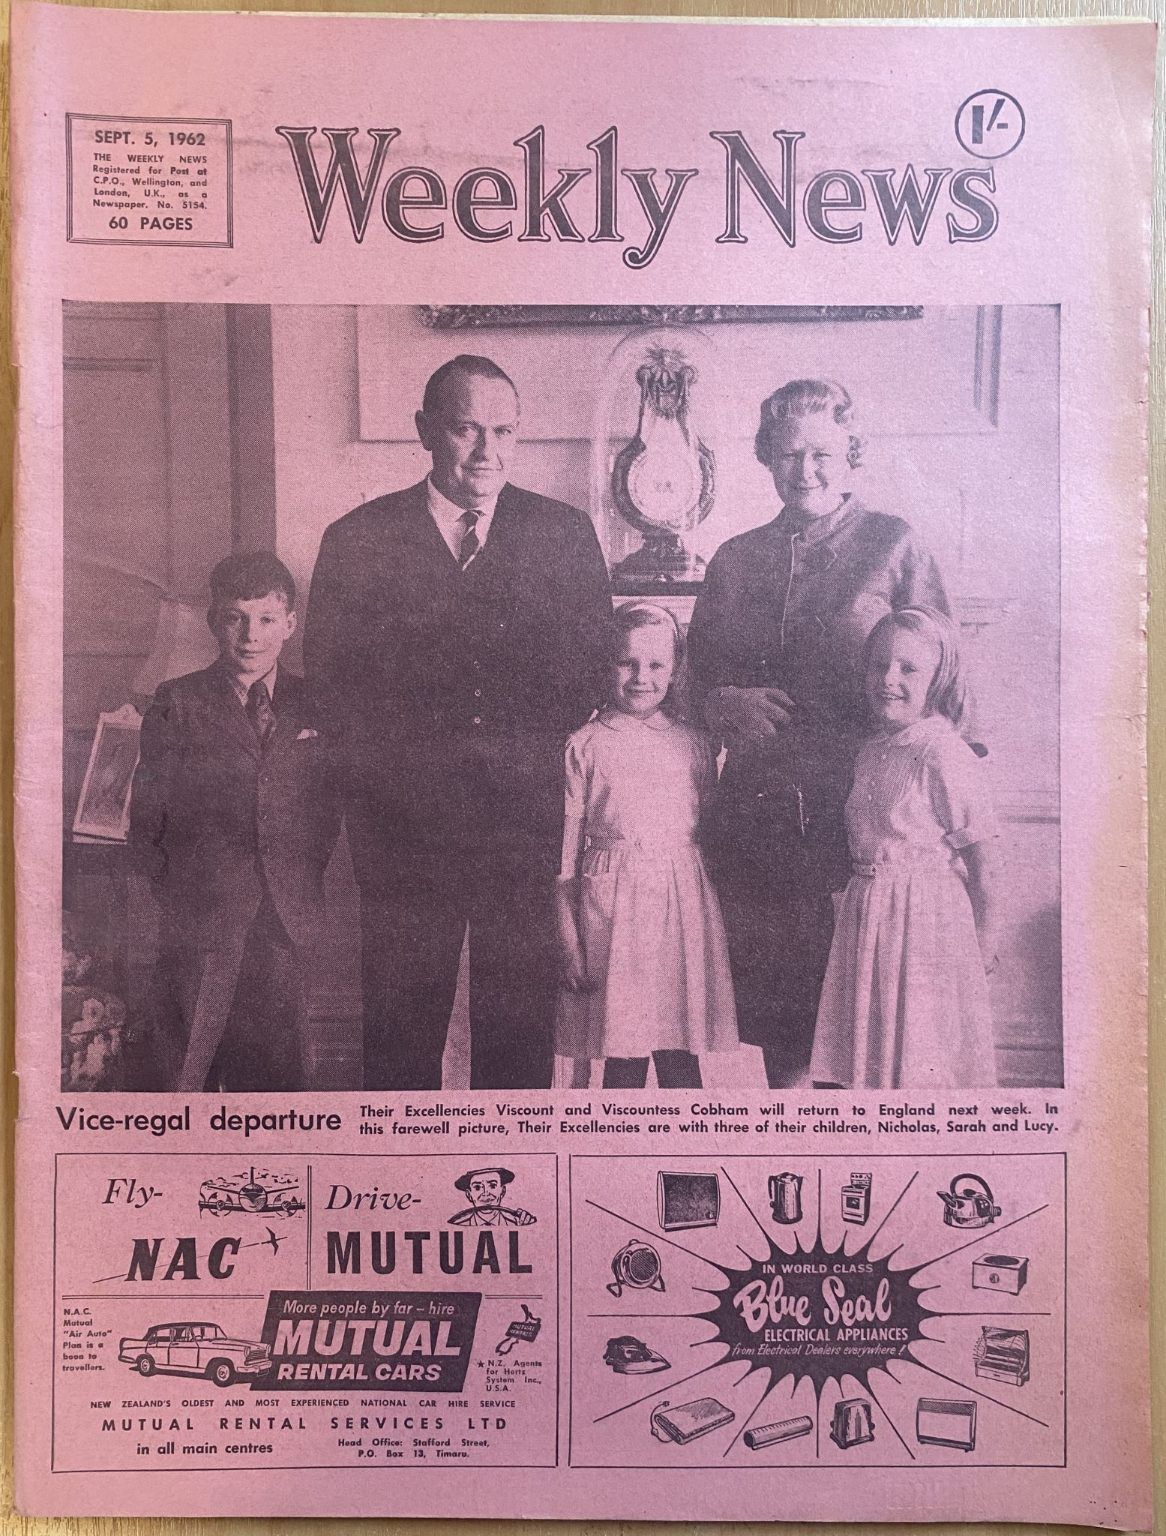 OLD NEWSPAPER: The Weekly News, No. 5154, 5 September 1962